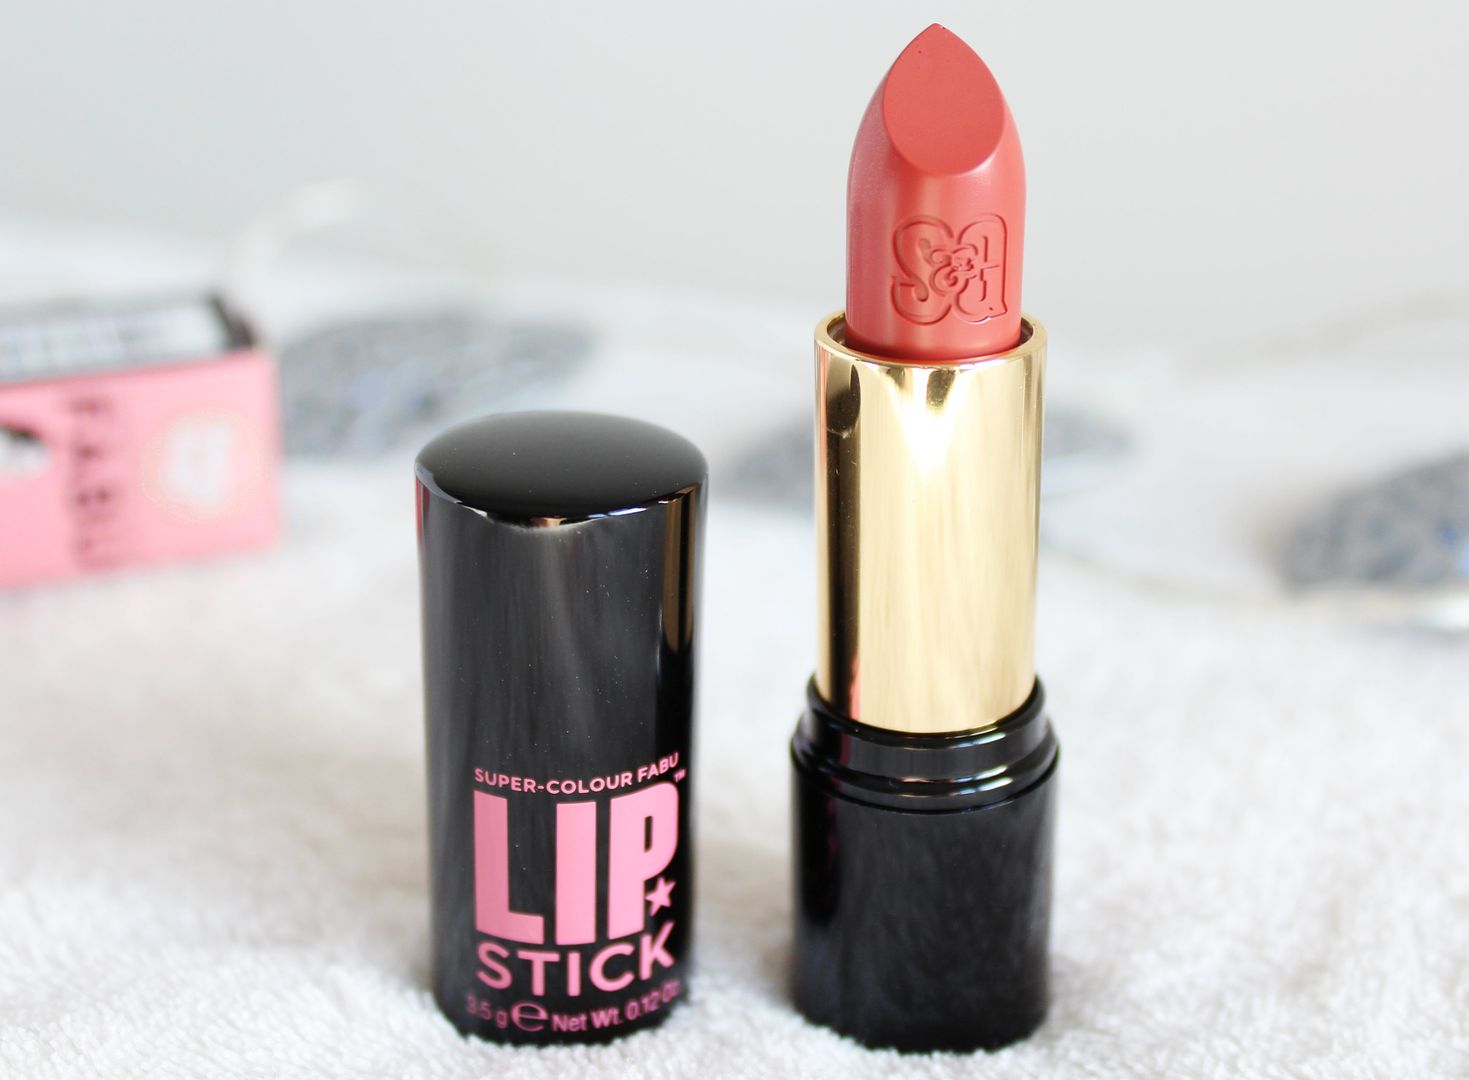 Every-Day-Red-Lip-Soap-And-Glory-Super-Colour-Fabu-Lipstick-Perfect-Day-Review-In-The-Tube-Packaging-Belle-Amie-UK-Beauty-Fashion-Lifestyle-Blog